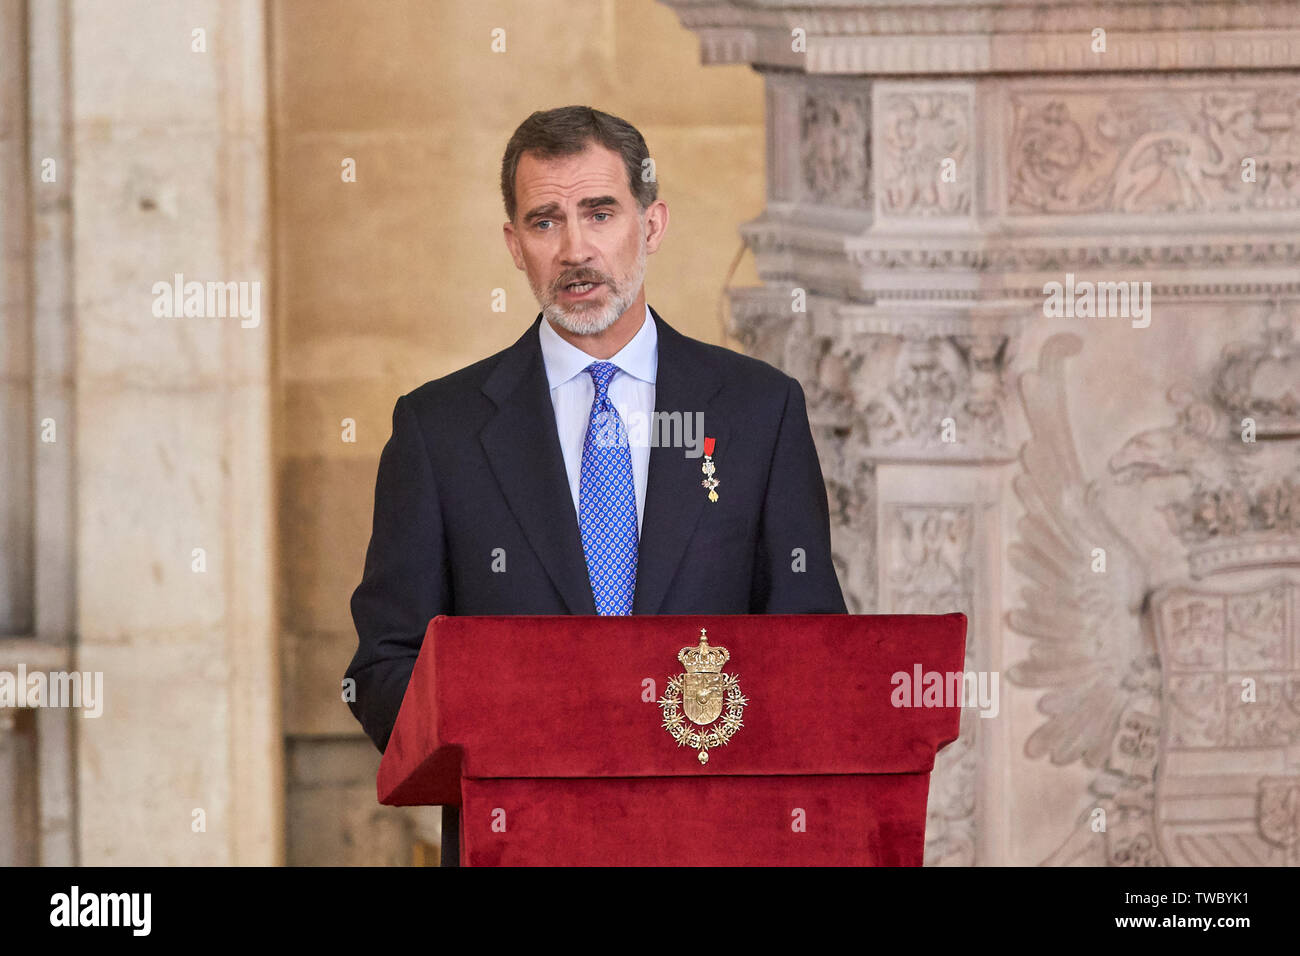 King Felipe VI of Spain speaks during the Imposition of decorations of the Civil Merit Order at the Royal Palace in Madrid. Stock Photo